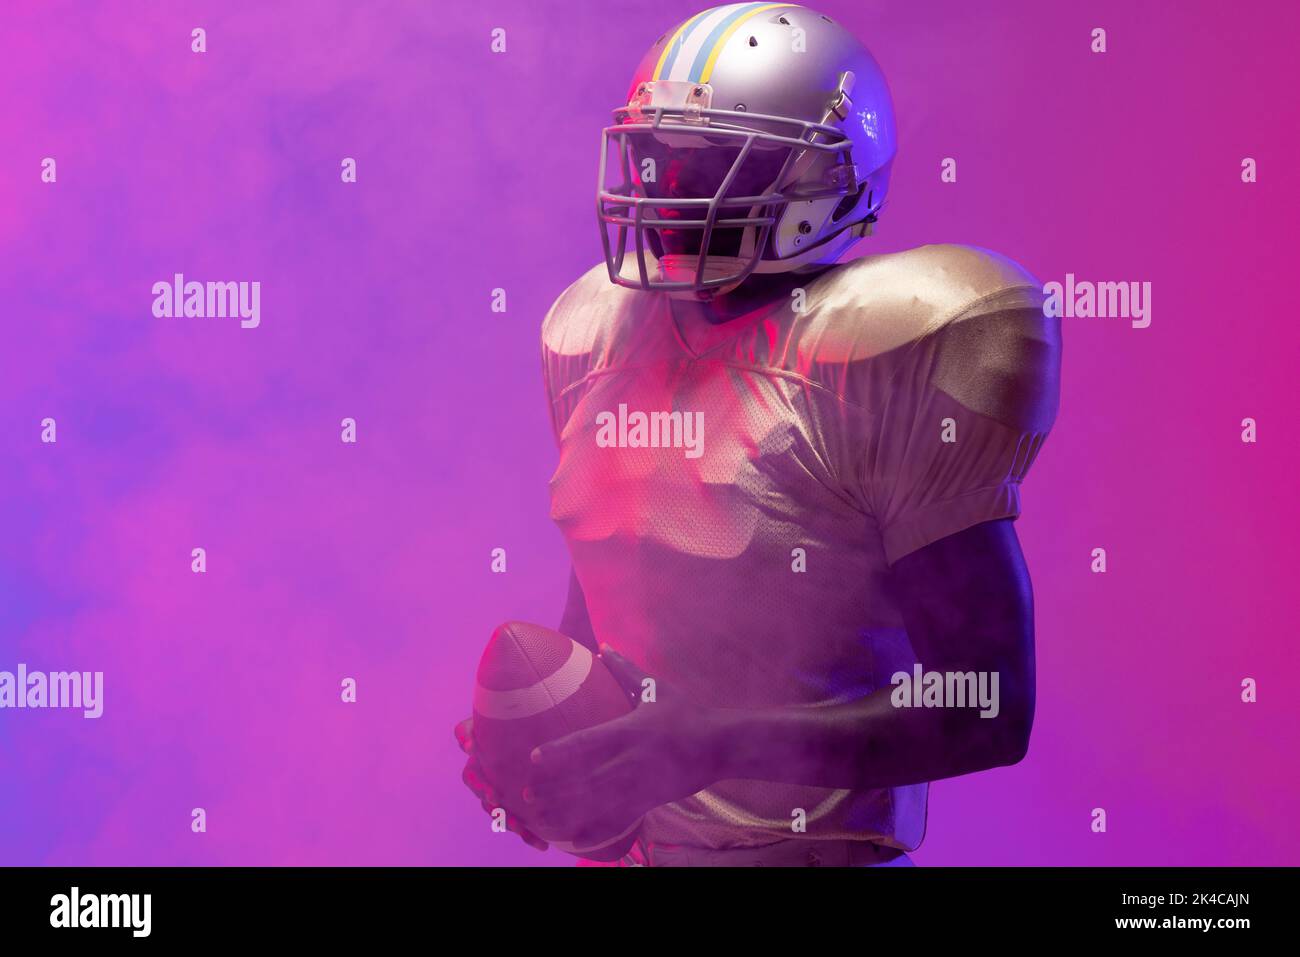 African american male american football player holding ball with neon purple and pink lighting. Sport, movement, training and active lifestyle concept Stock Photo